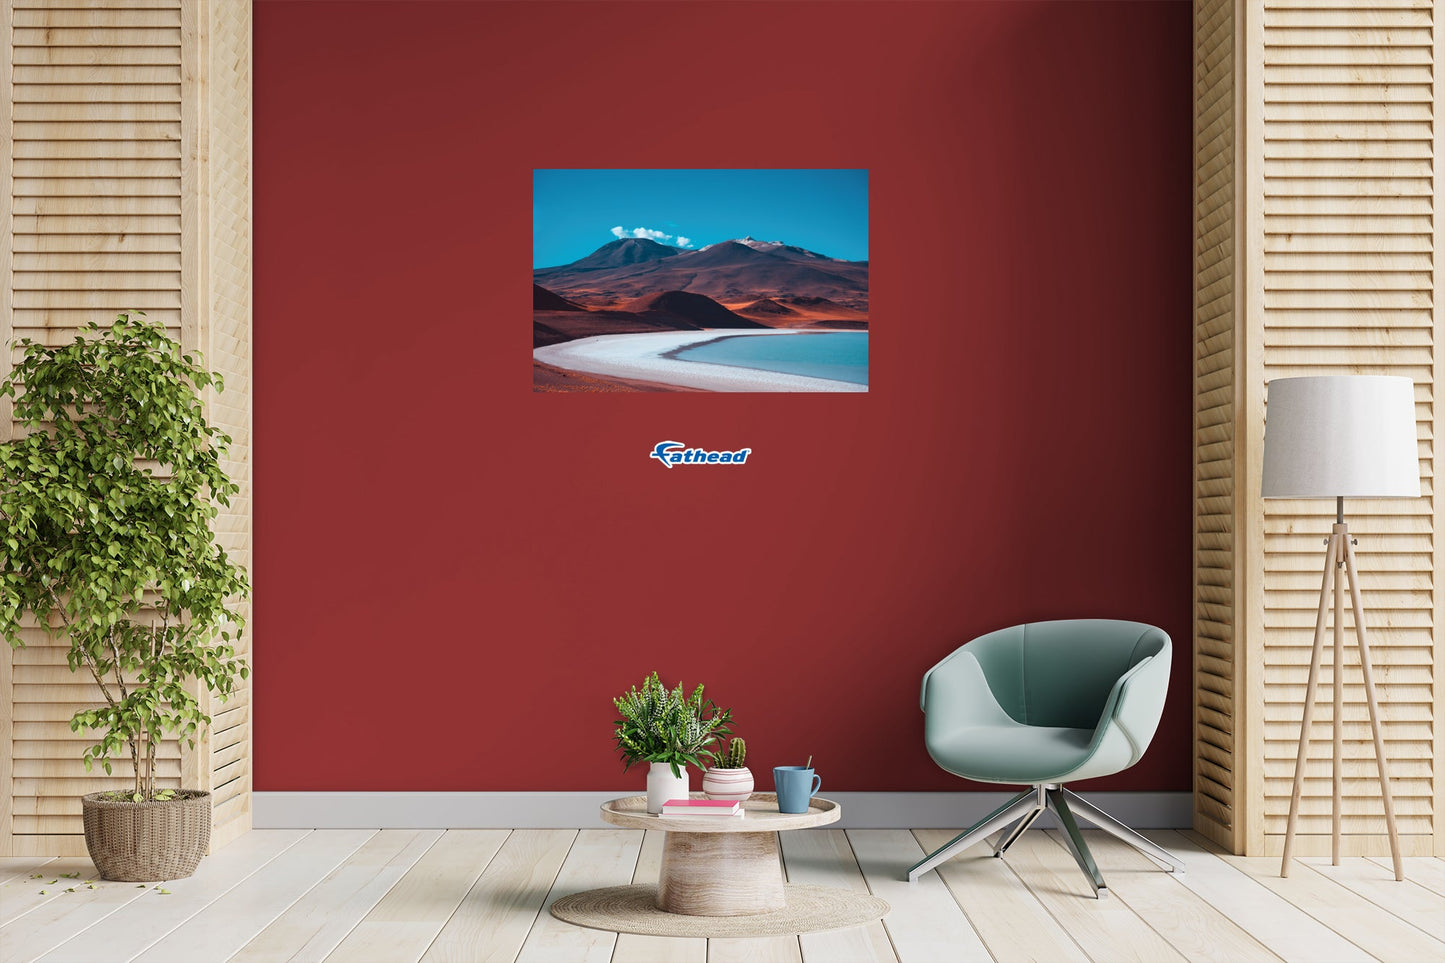 Generic Scenery: Red Earth Poster - Removable Adhesive Decal